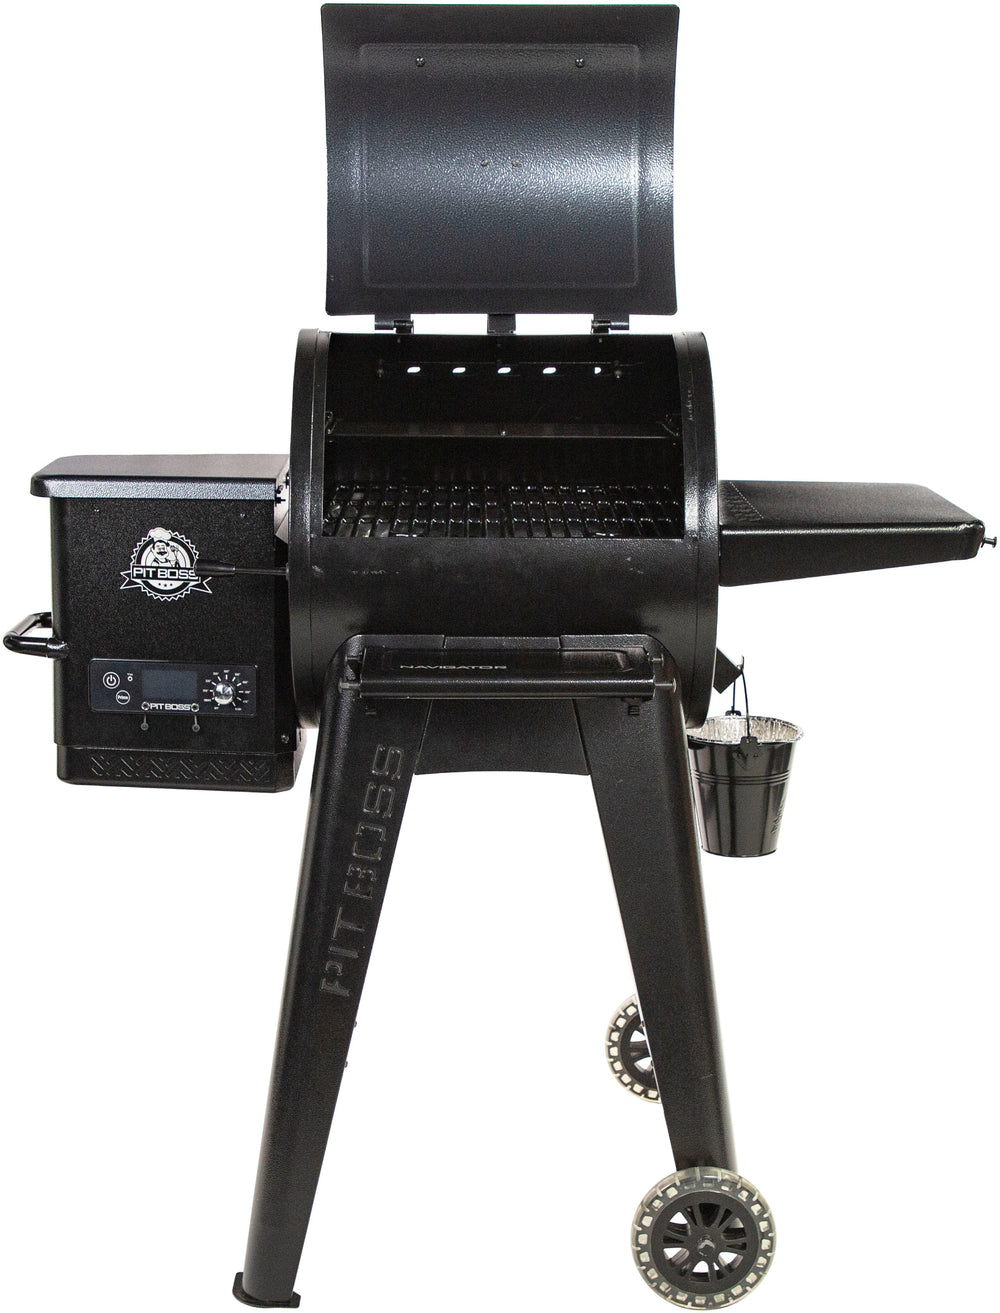 Pit Boss - Navigator 550 Wood Pellet Grill with Grill Cover - Dark Grey_1